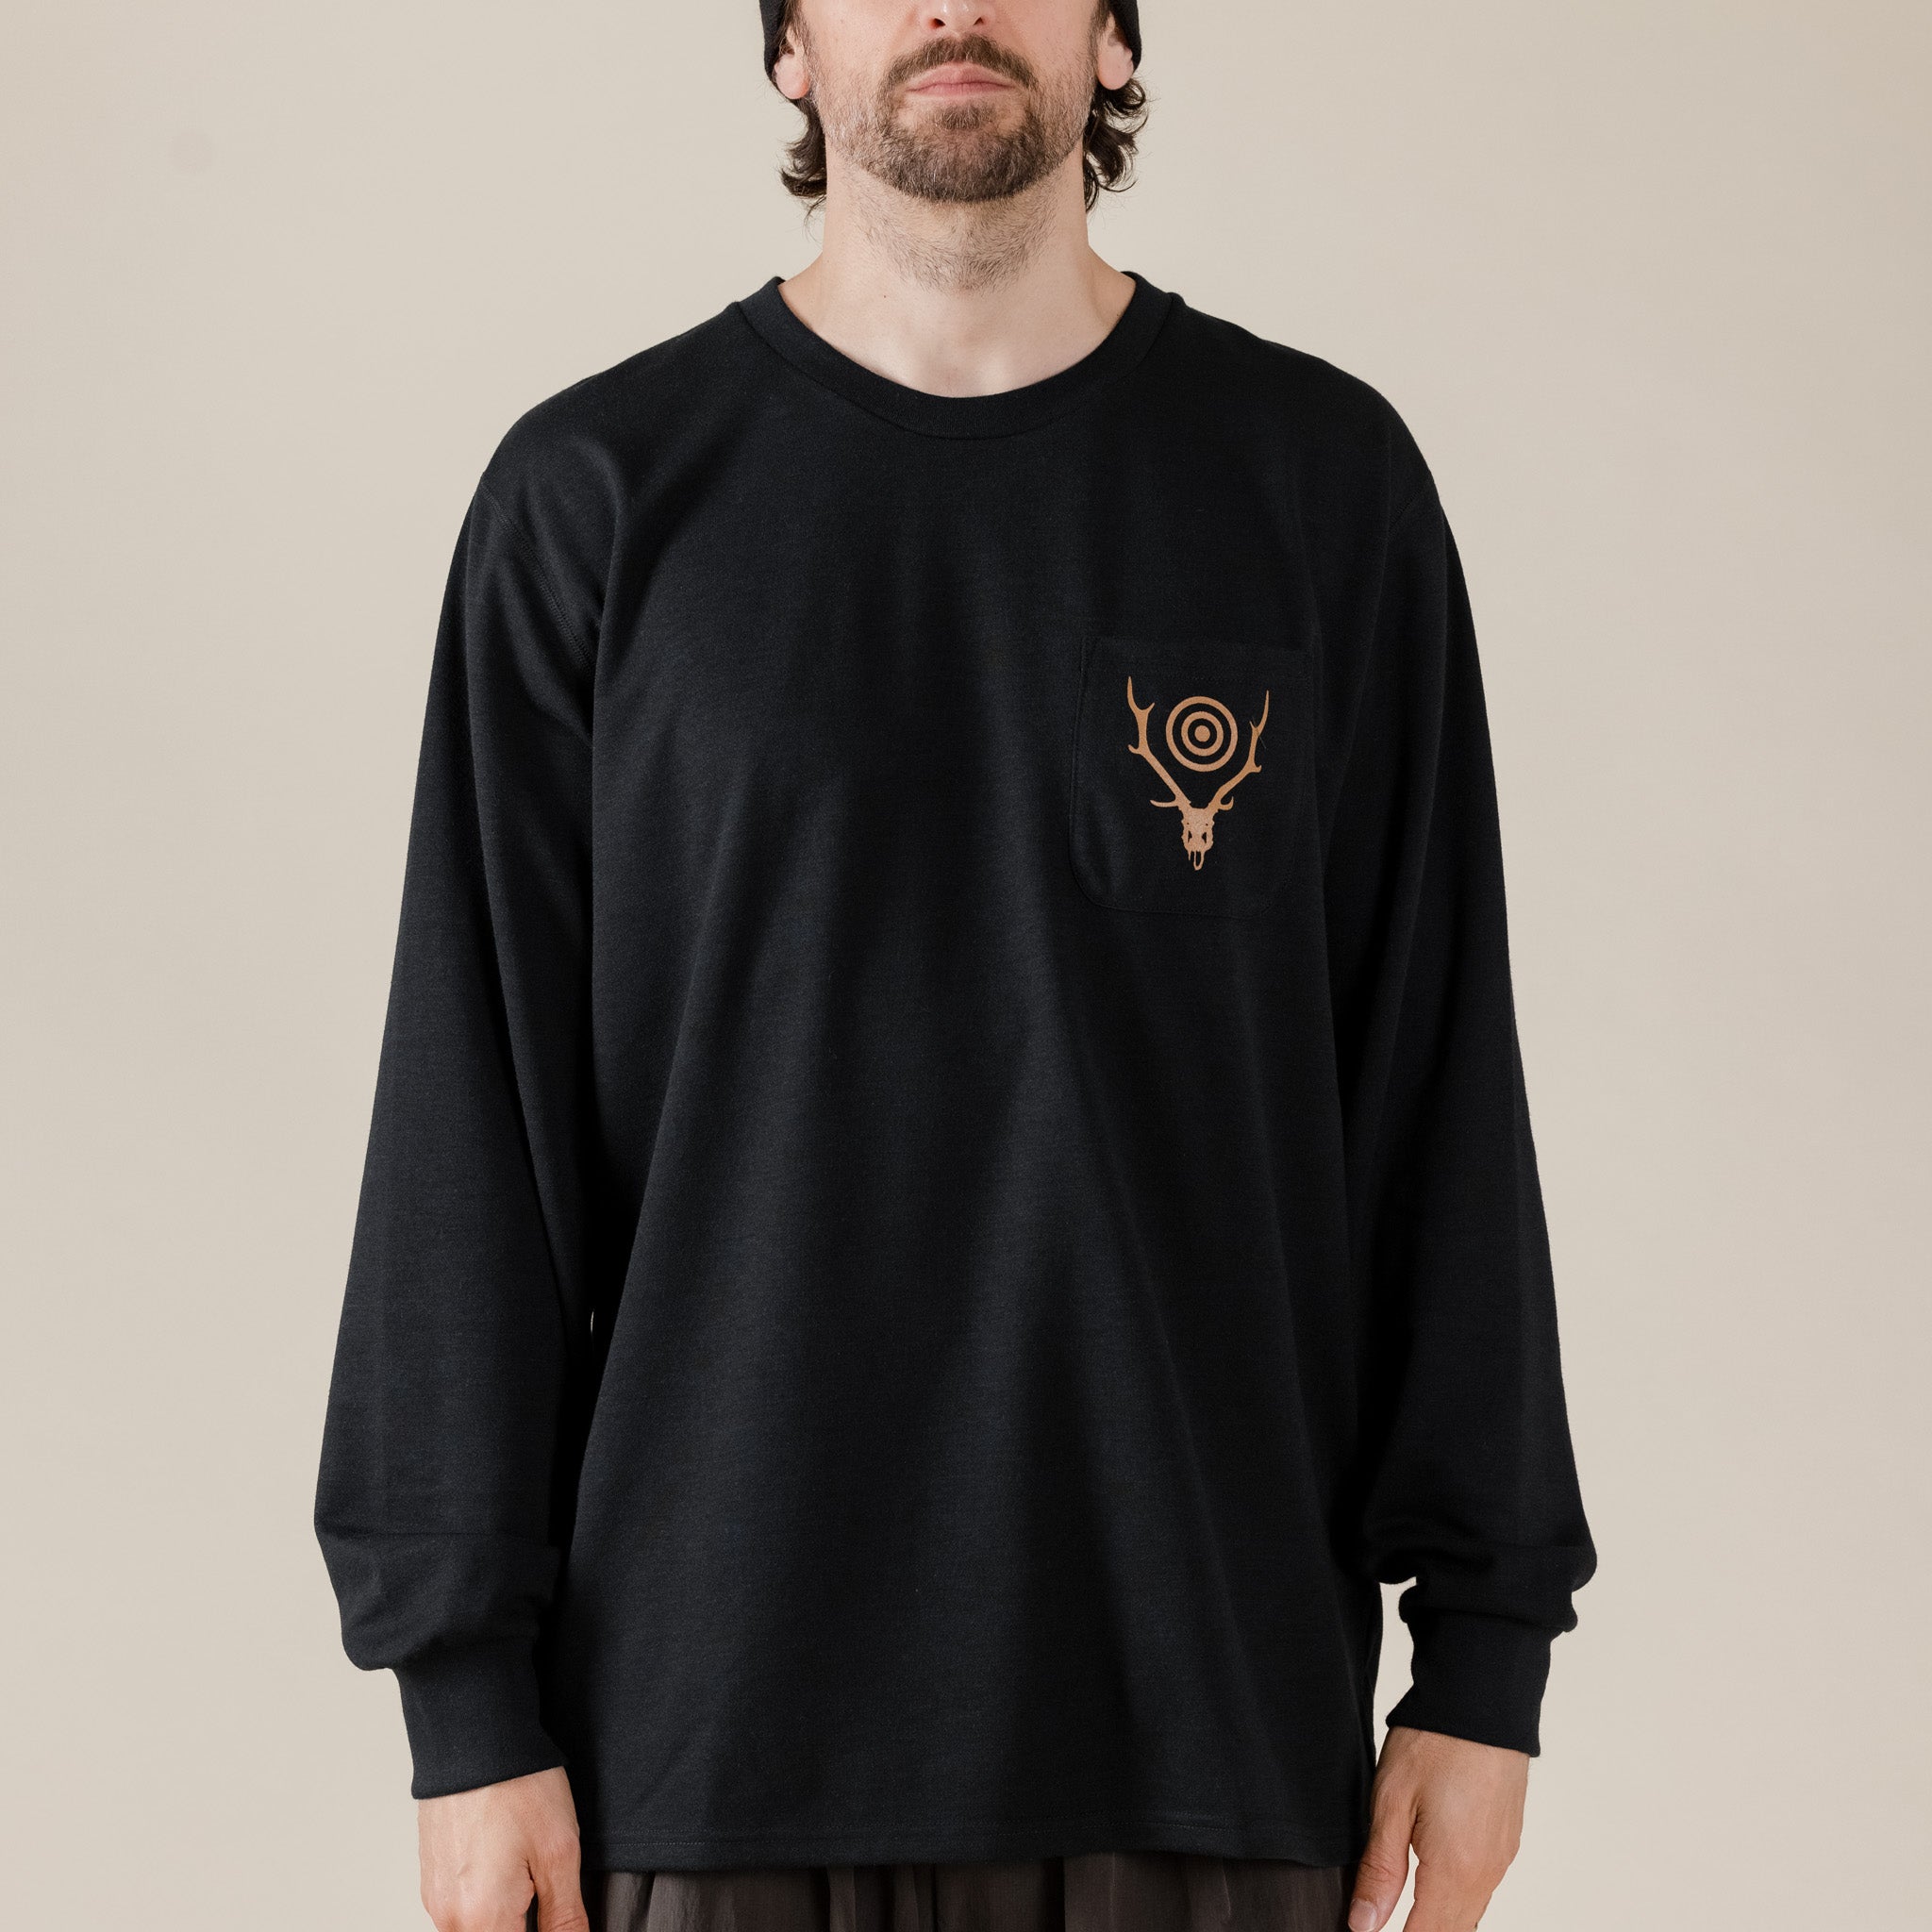 South2 West8 - L/S Round Pocket Tee - Circle Horn - Black UK USA Stockist S2W8 Manchester London New York Best Price